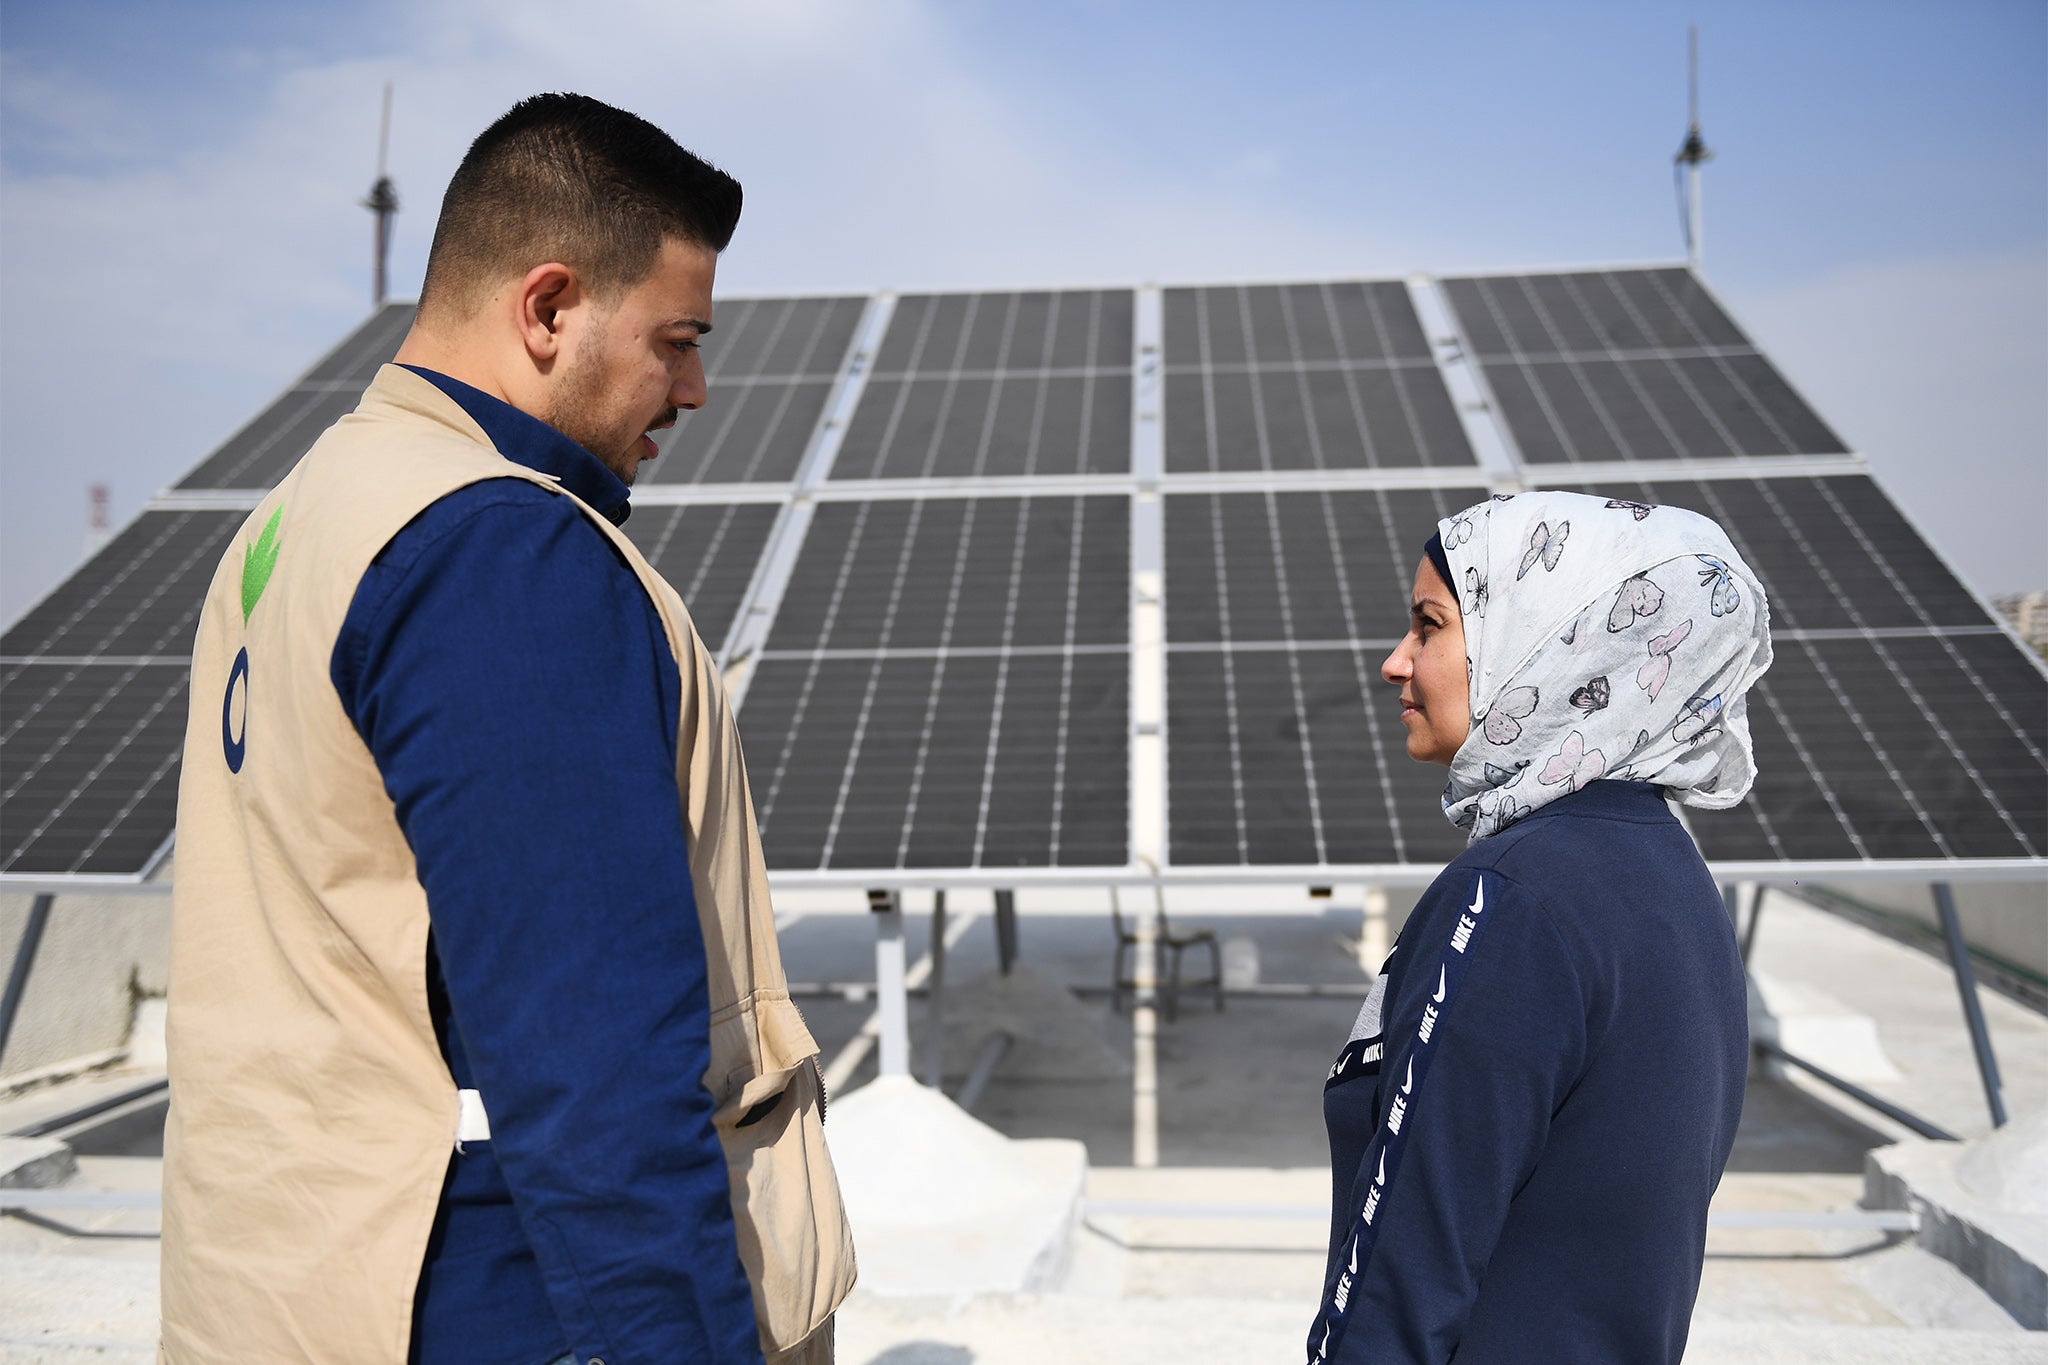 An aid worker from DEC charity Action Against Hunger and the manager of a school working together on a solar electricity project supported by AAH in Aleppo